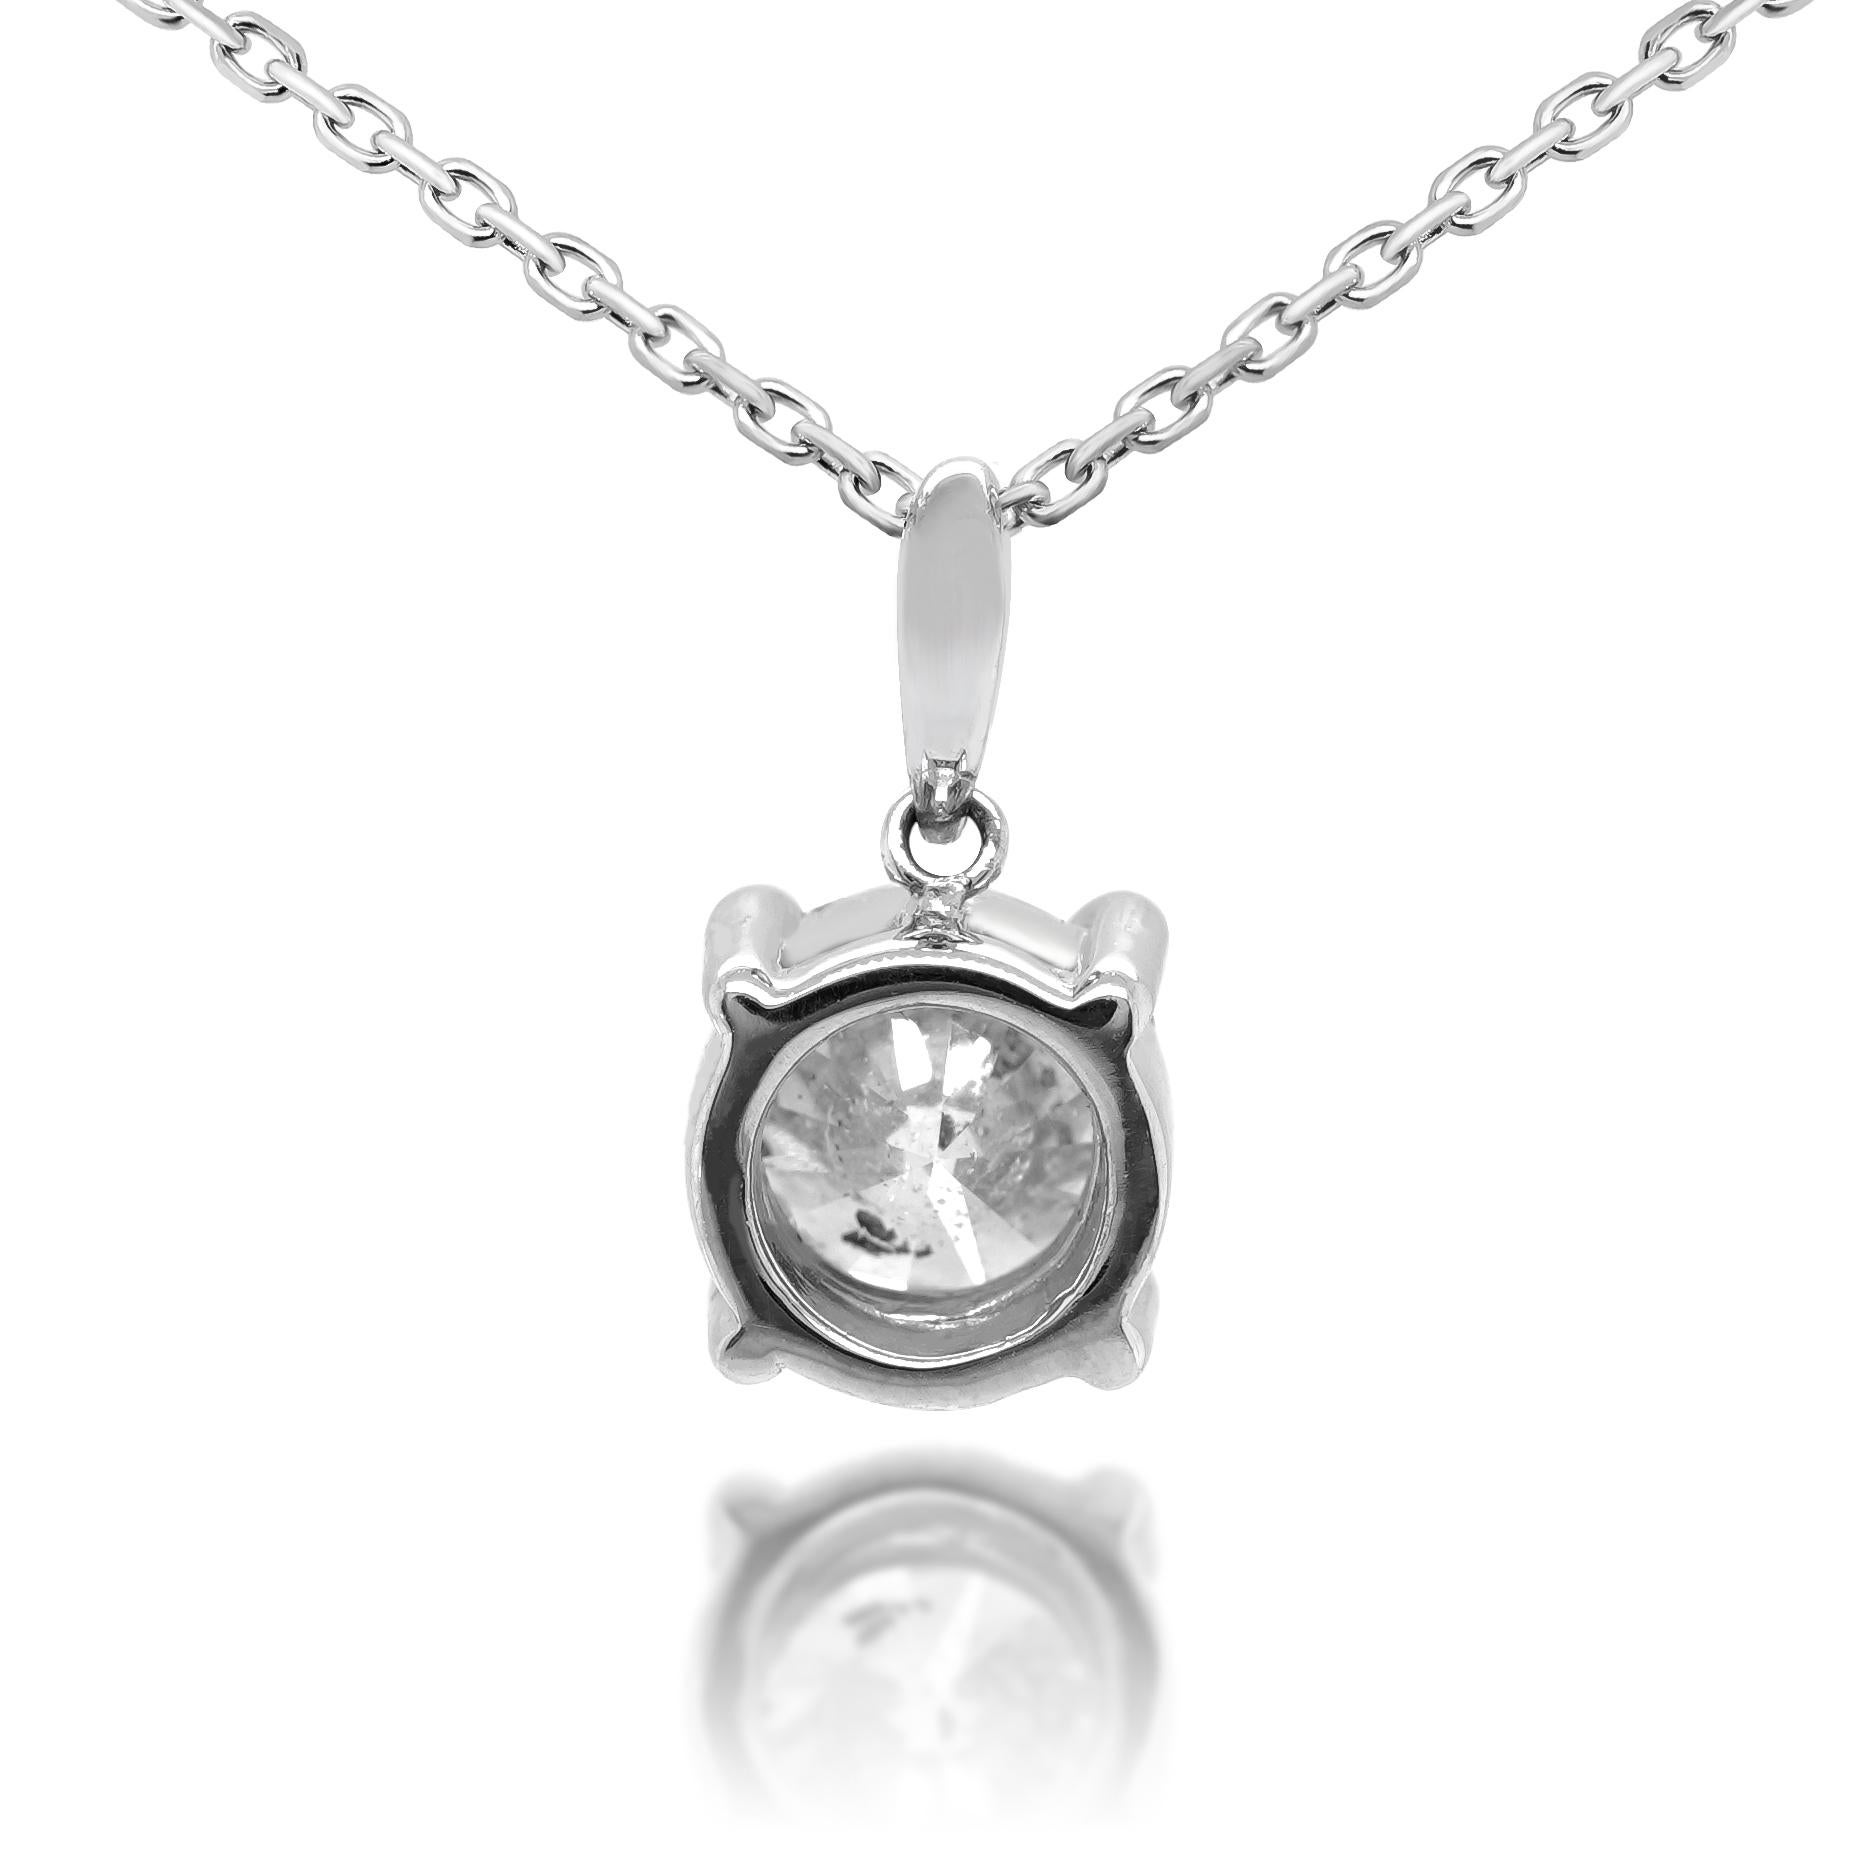 Round Cut Certified F Color Solitaire Necklace PT 900 Everyday Reasonable Jewelry For Sale